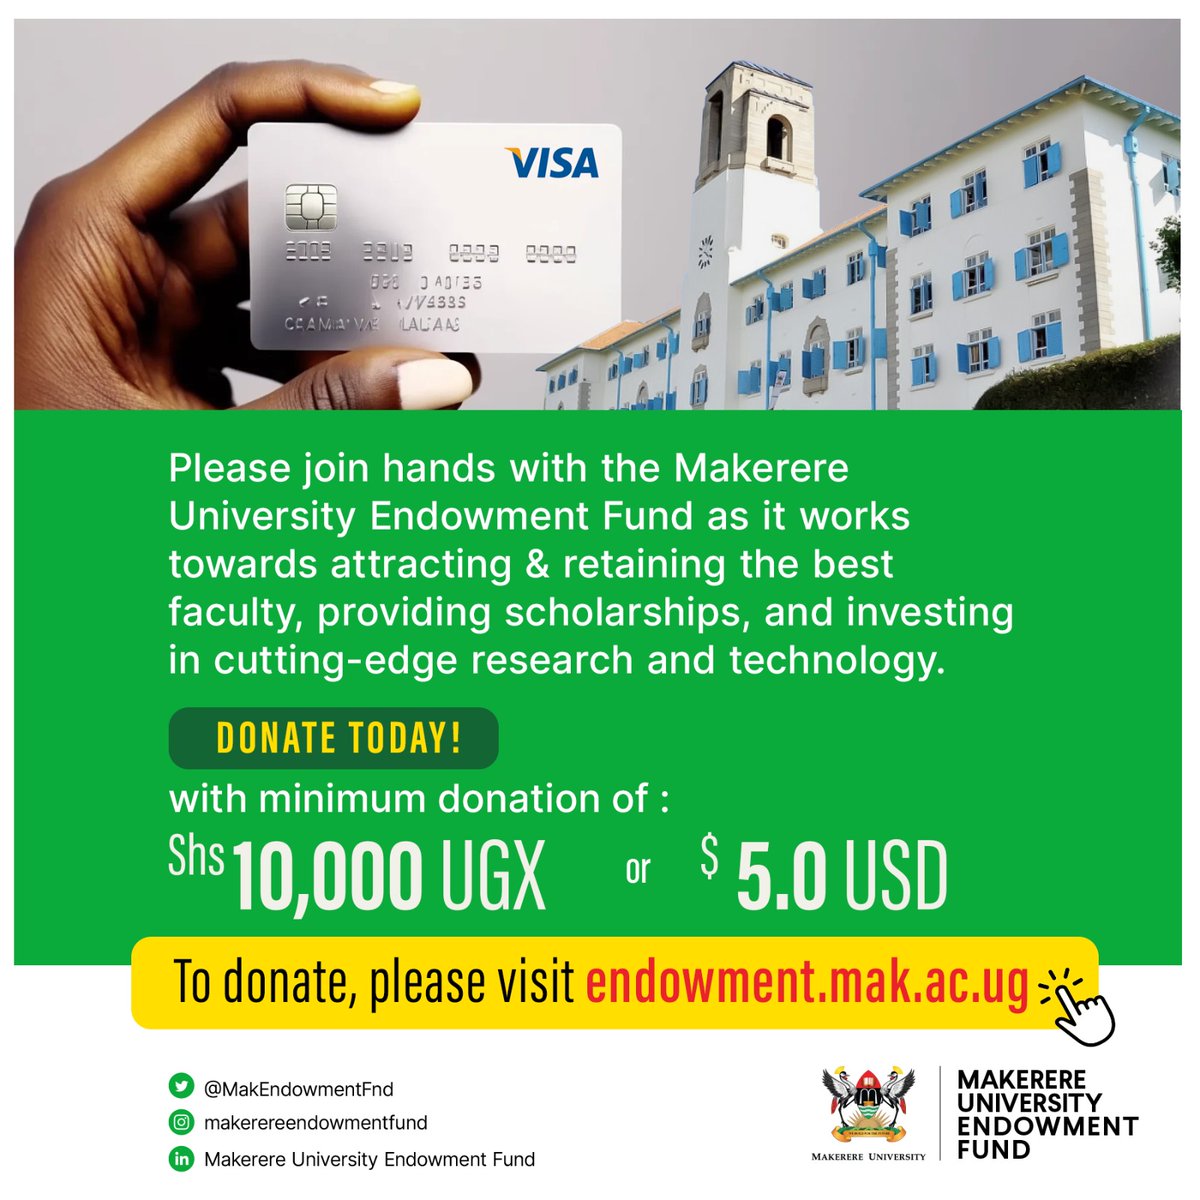 Friends, Alumni, staff of @Makerere, please join the #MakAdvanceSystem to donate a minimum of Ugx.10,000 or 5USD to @MakEndowmentFnd to support research, scholarships and Infrastructure development. Visit endowment.mak.ac.ug to register.